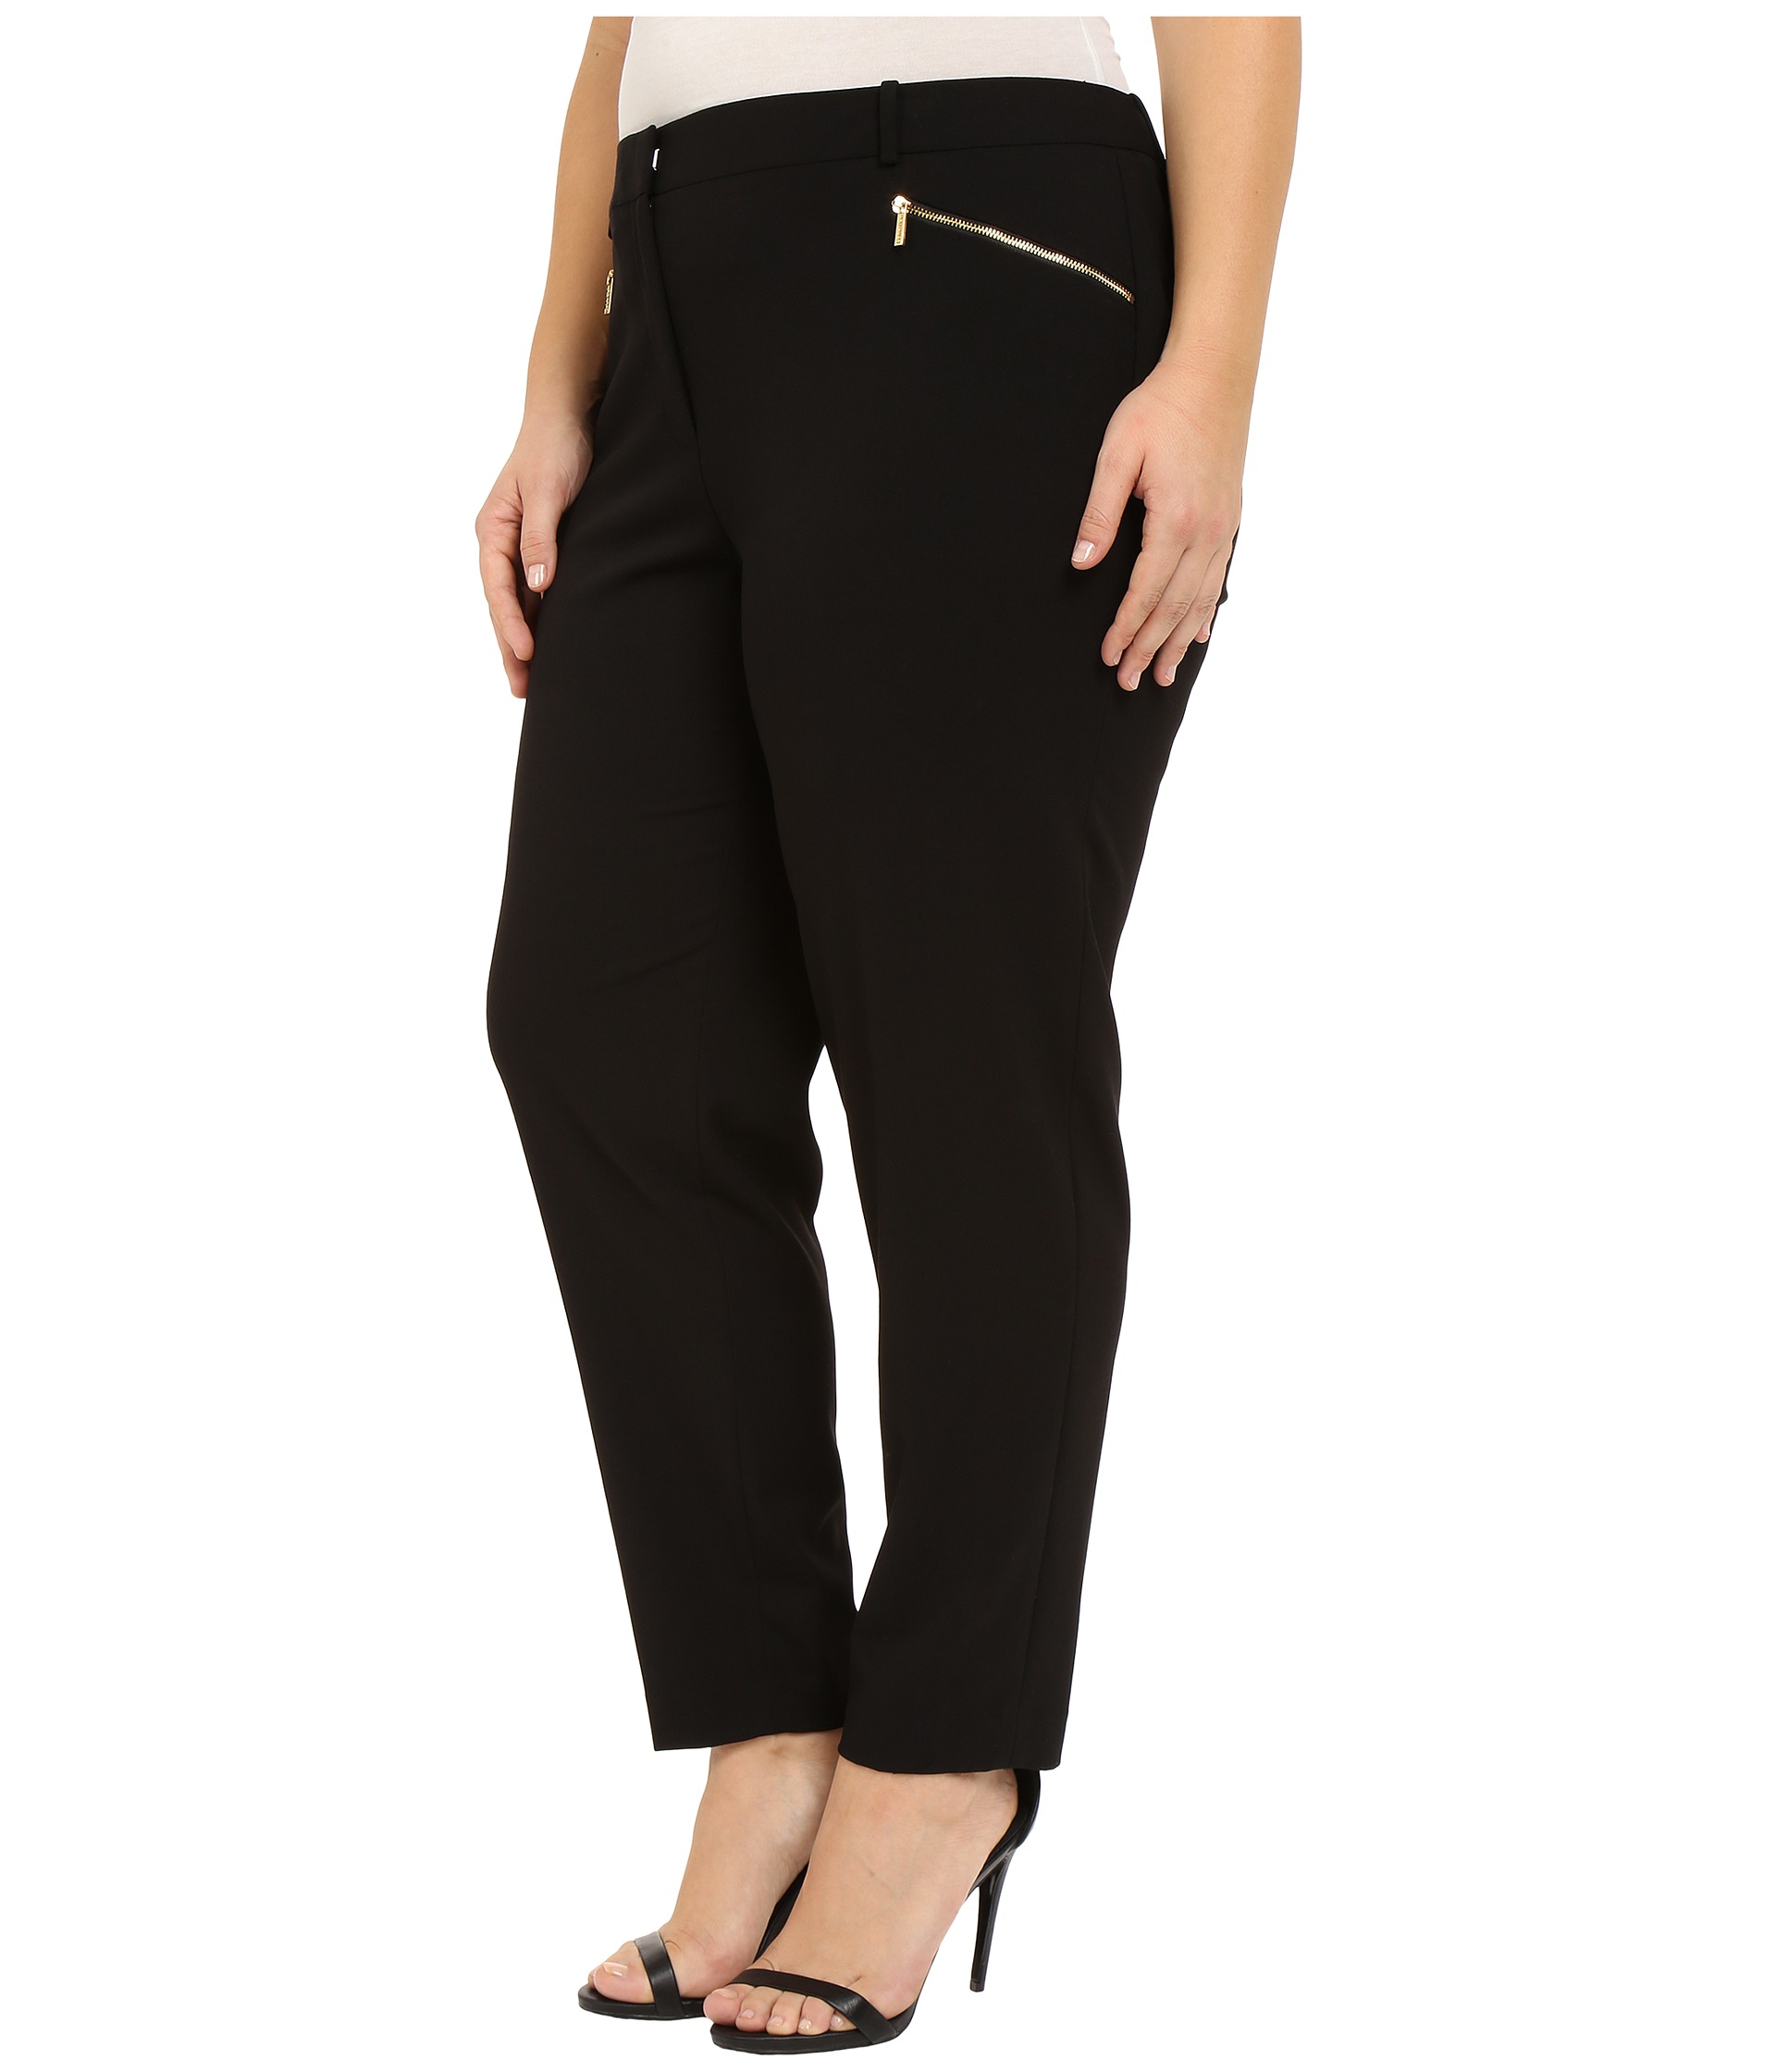 Calvin Klein Plus Plus Size Skinny Pants with Zippers at Zappos.com